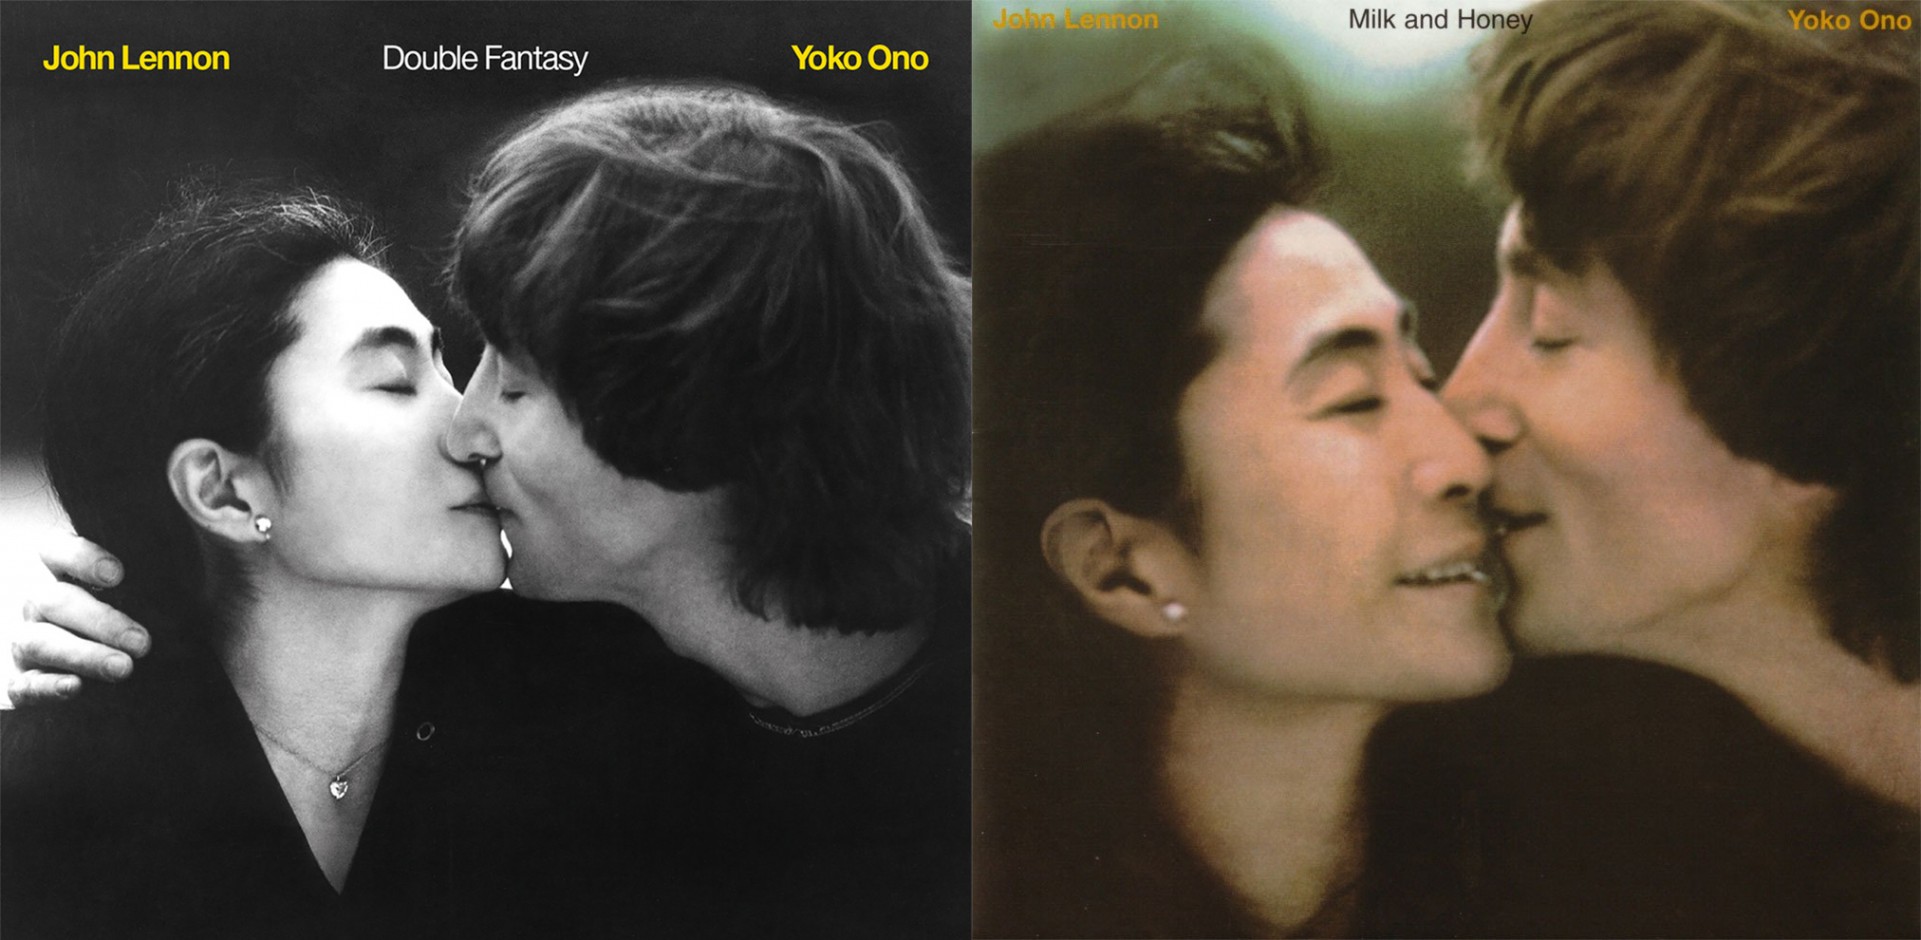 Looking for the font of Double Fantasy/Milk And Honey. thx in advance! 